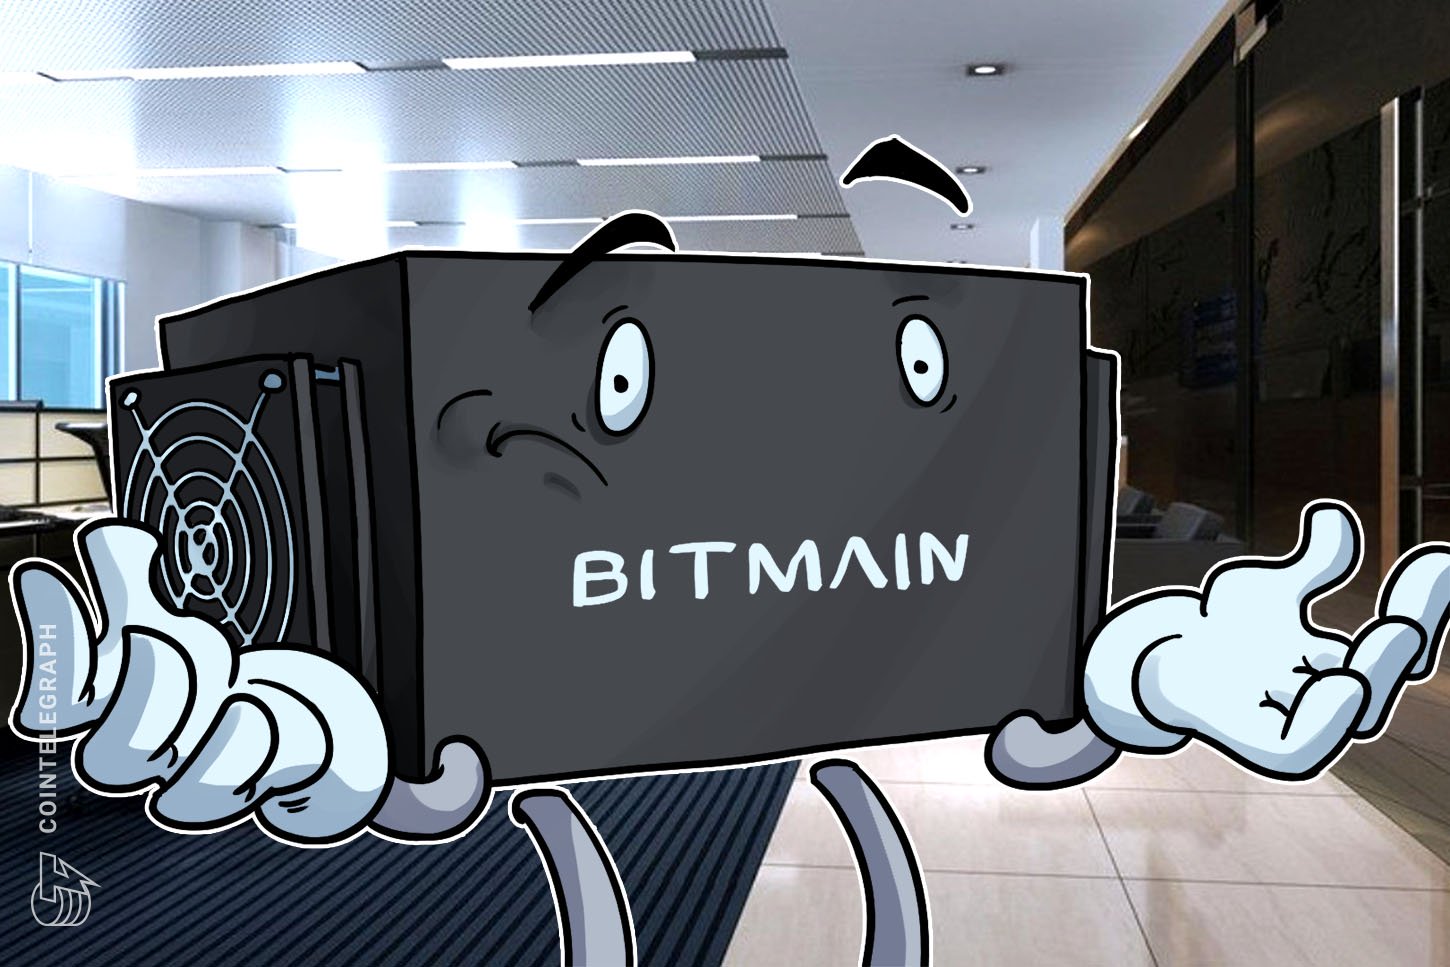 Micree Zhan Reportedly Used Non-public Guards to Bodily Take Over Bitmain